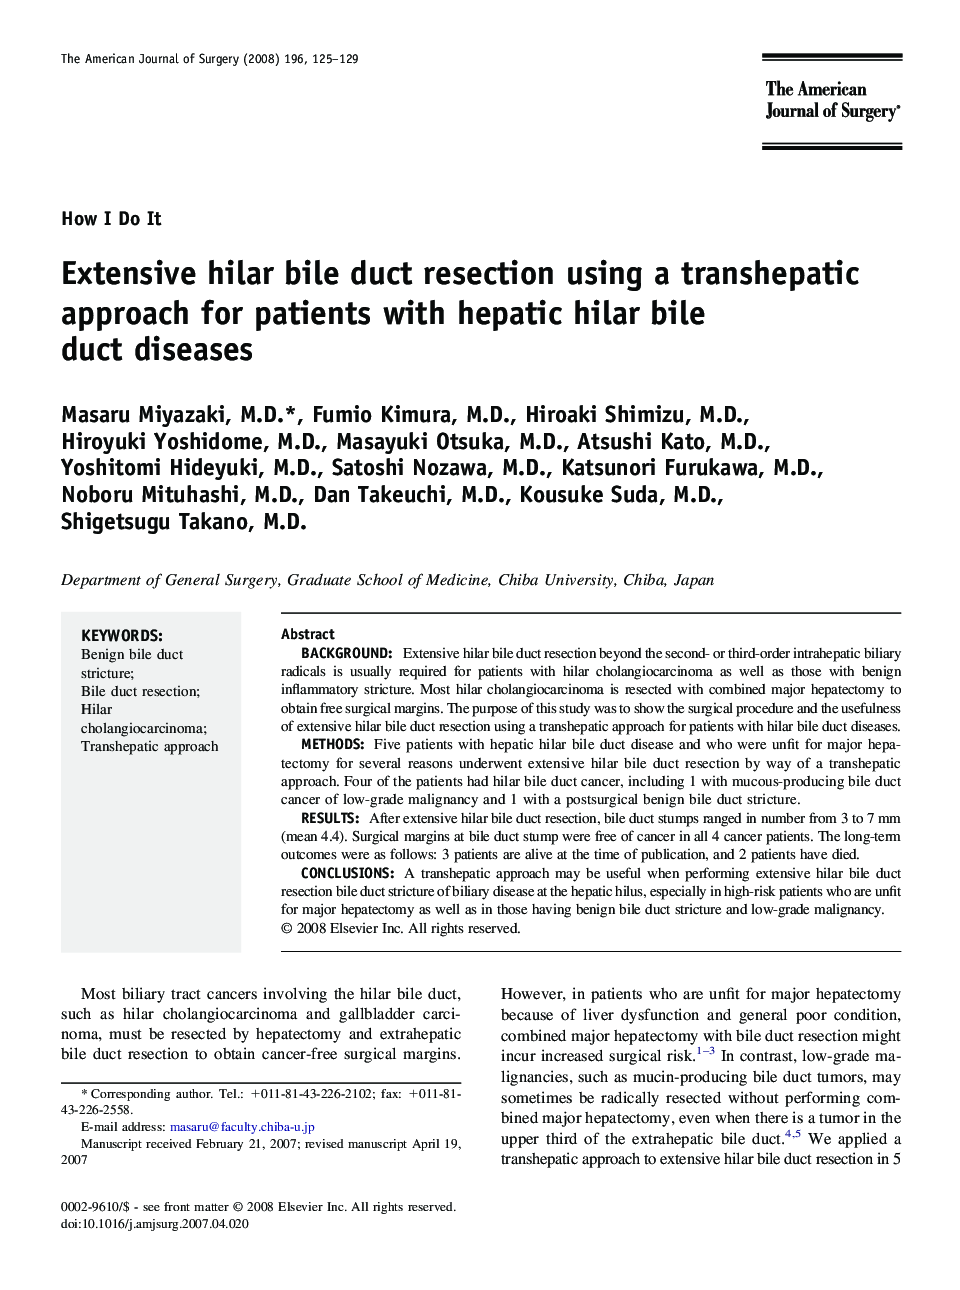 Extensive hilar bile duct resection using a transhepatic approach for patients with hepatic hilar bile duct diseases